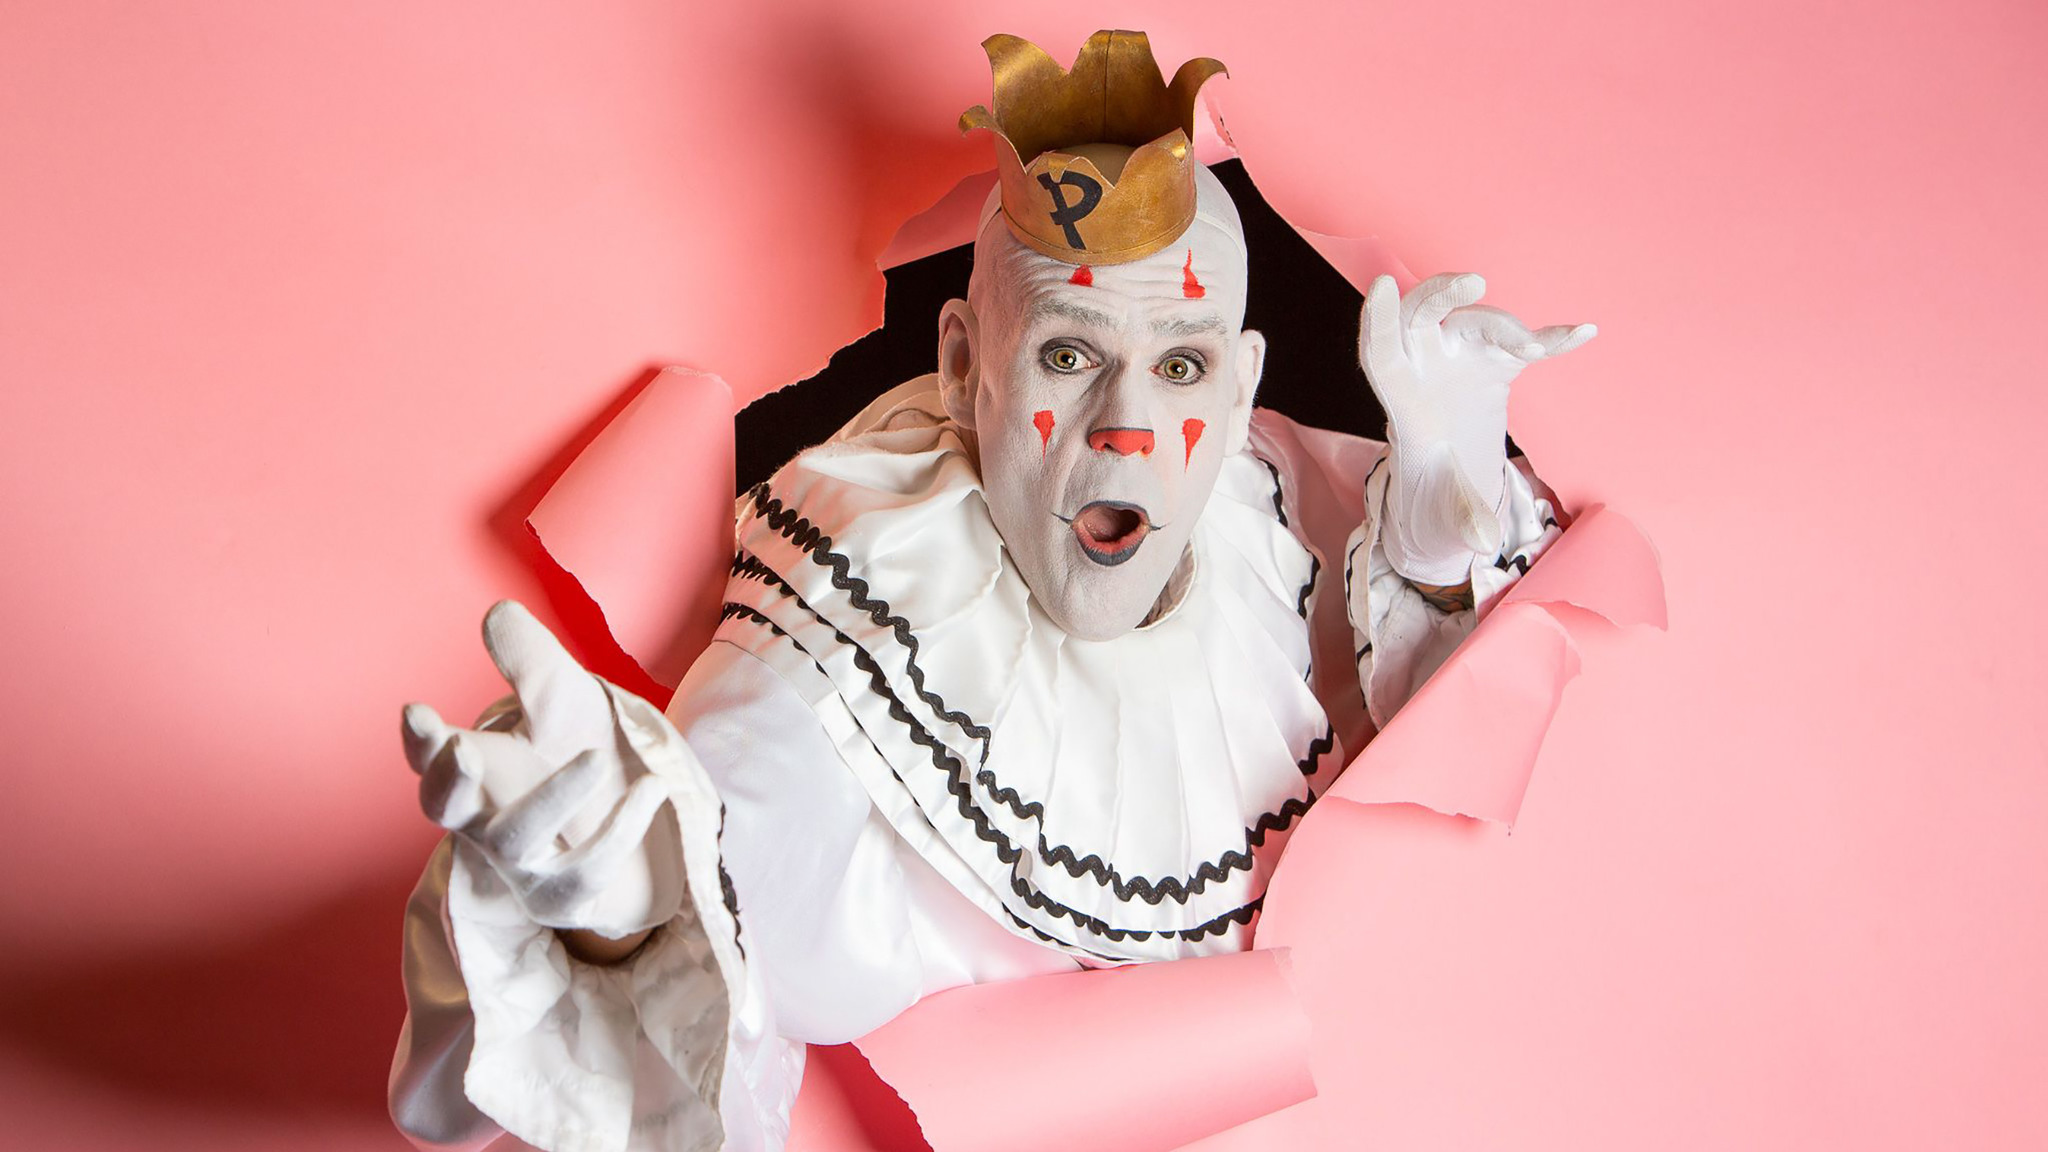 Puddles Pity Party Tickets Event Dates & Schedule